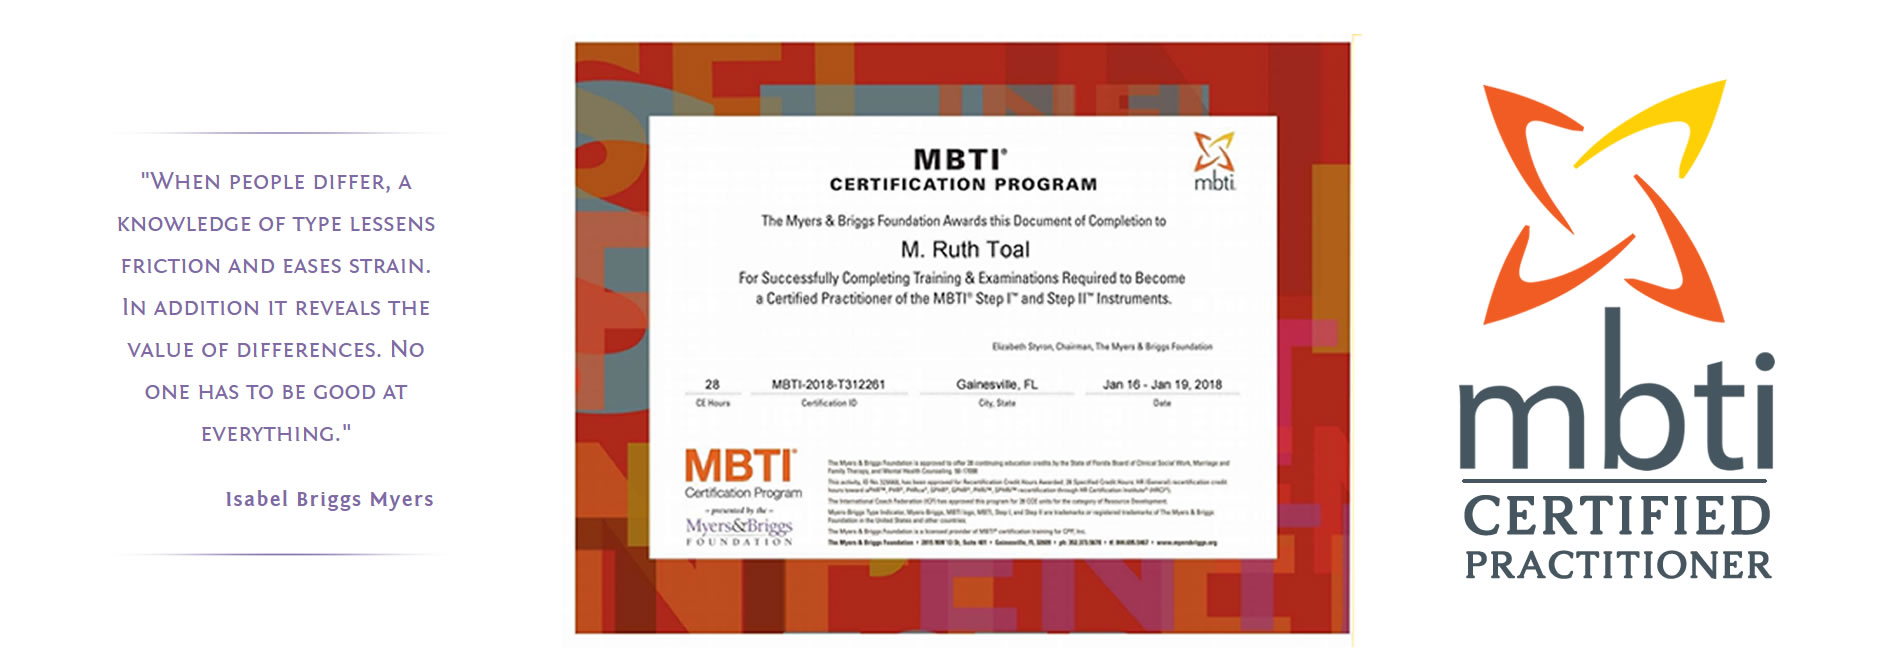 Coach Ruth is a certified MBTI Practitioner